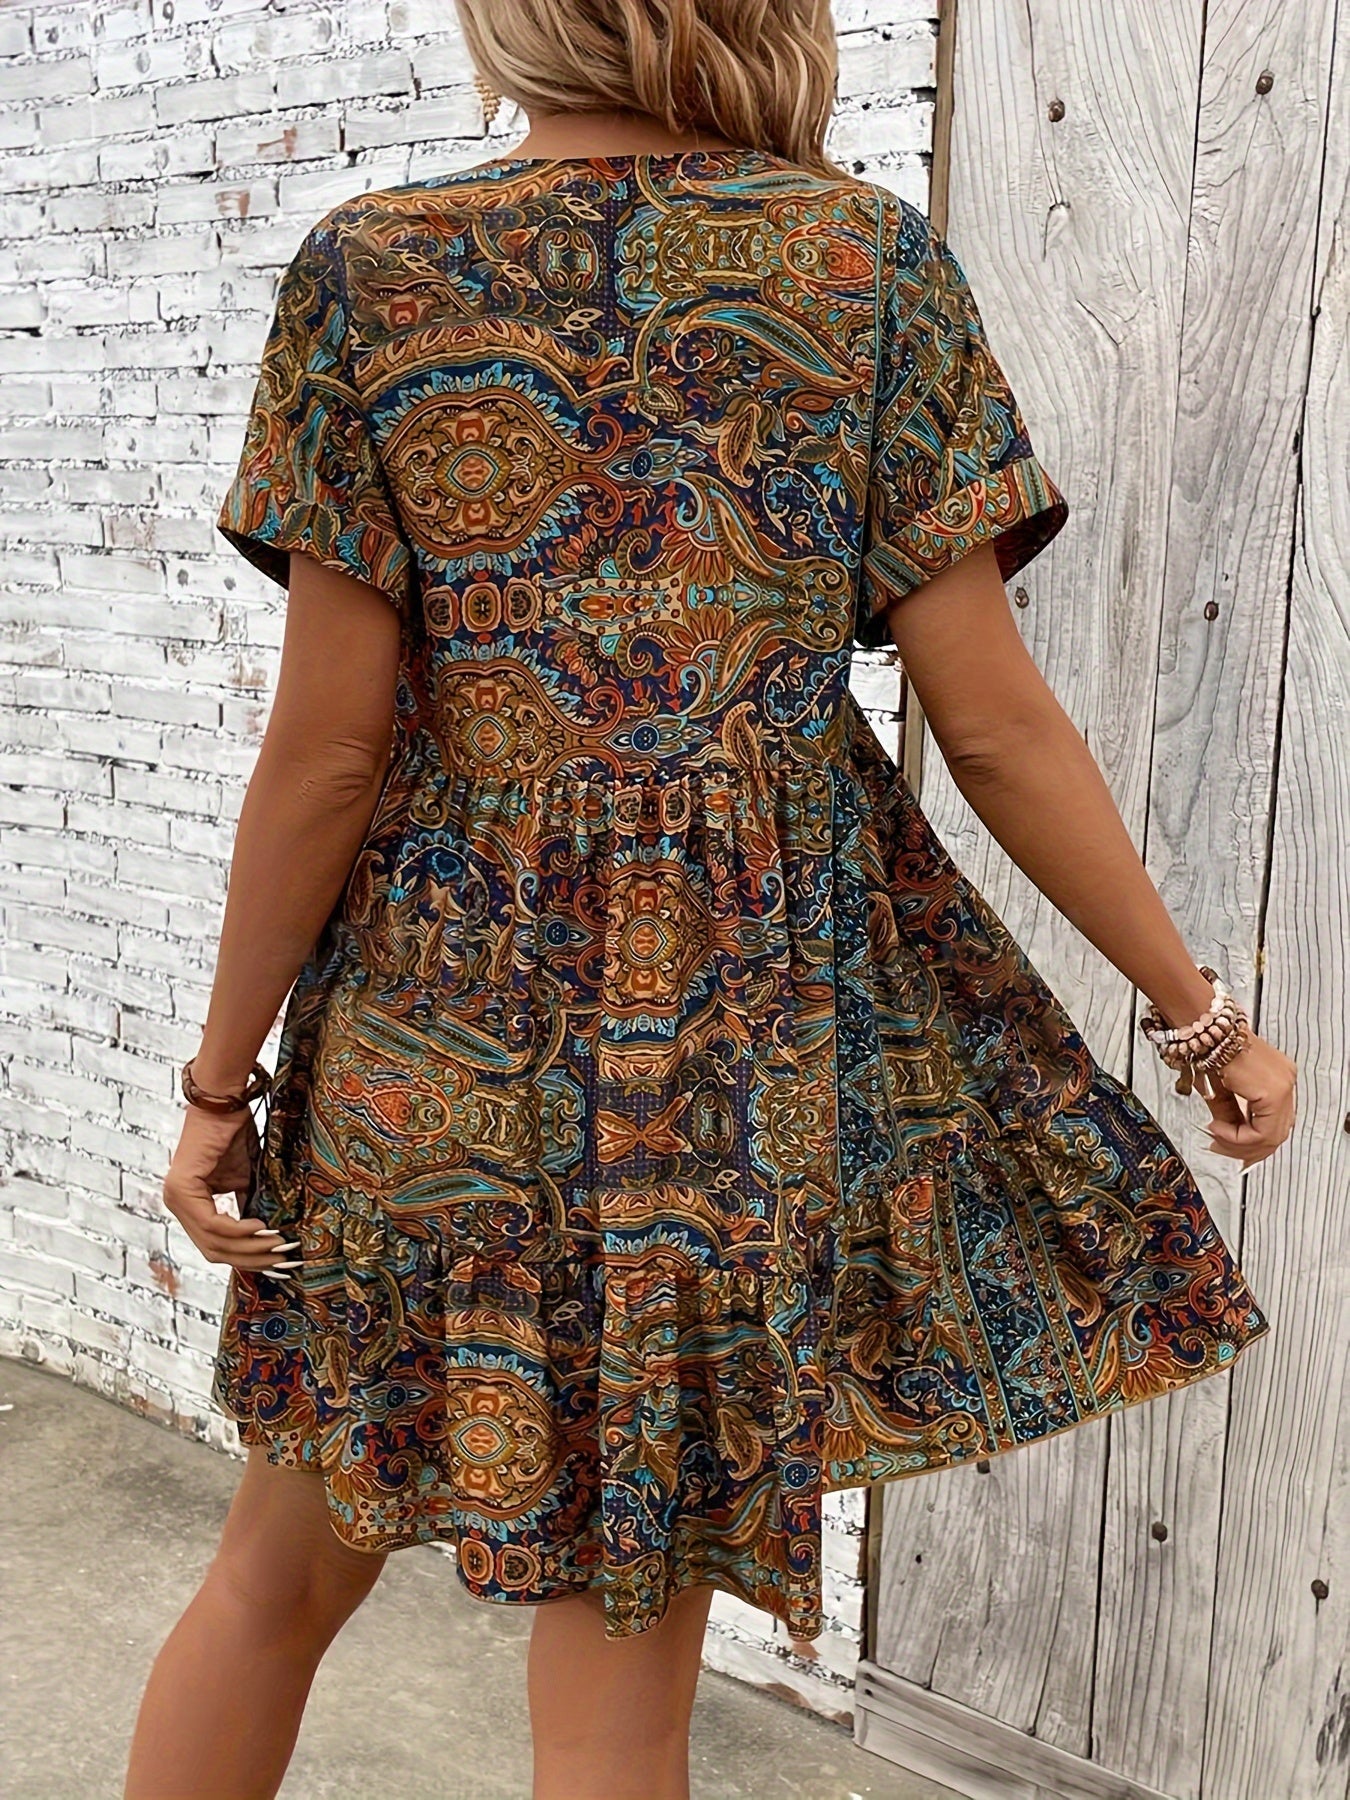 Vibrant Tribal Print Loose Fit Dress - Flowy, Relaxed V-Neck Summer Dress